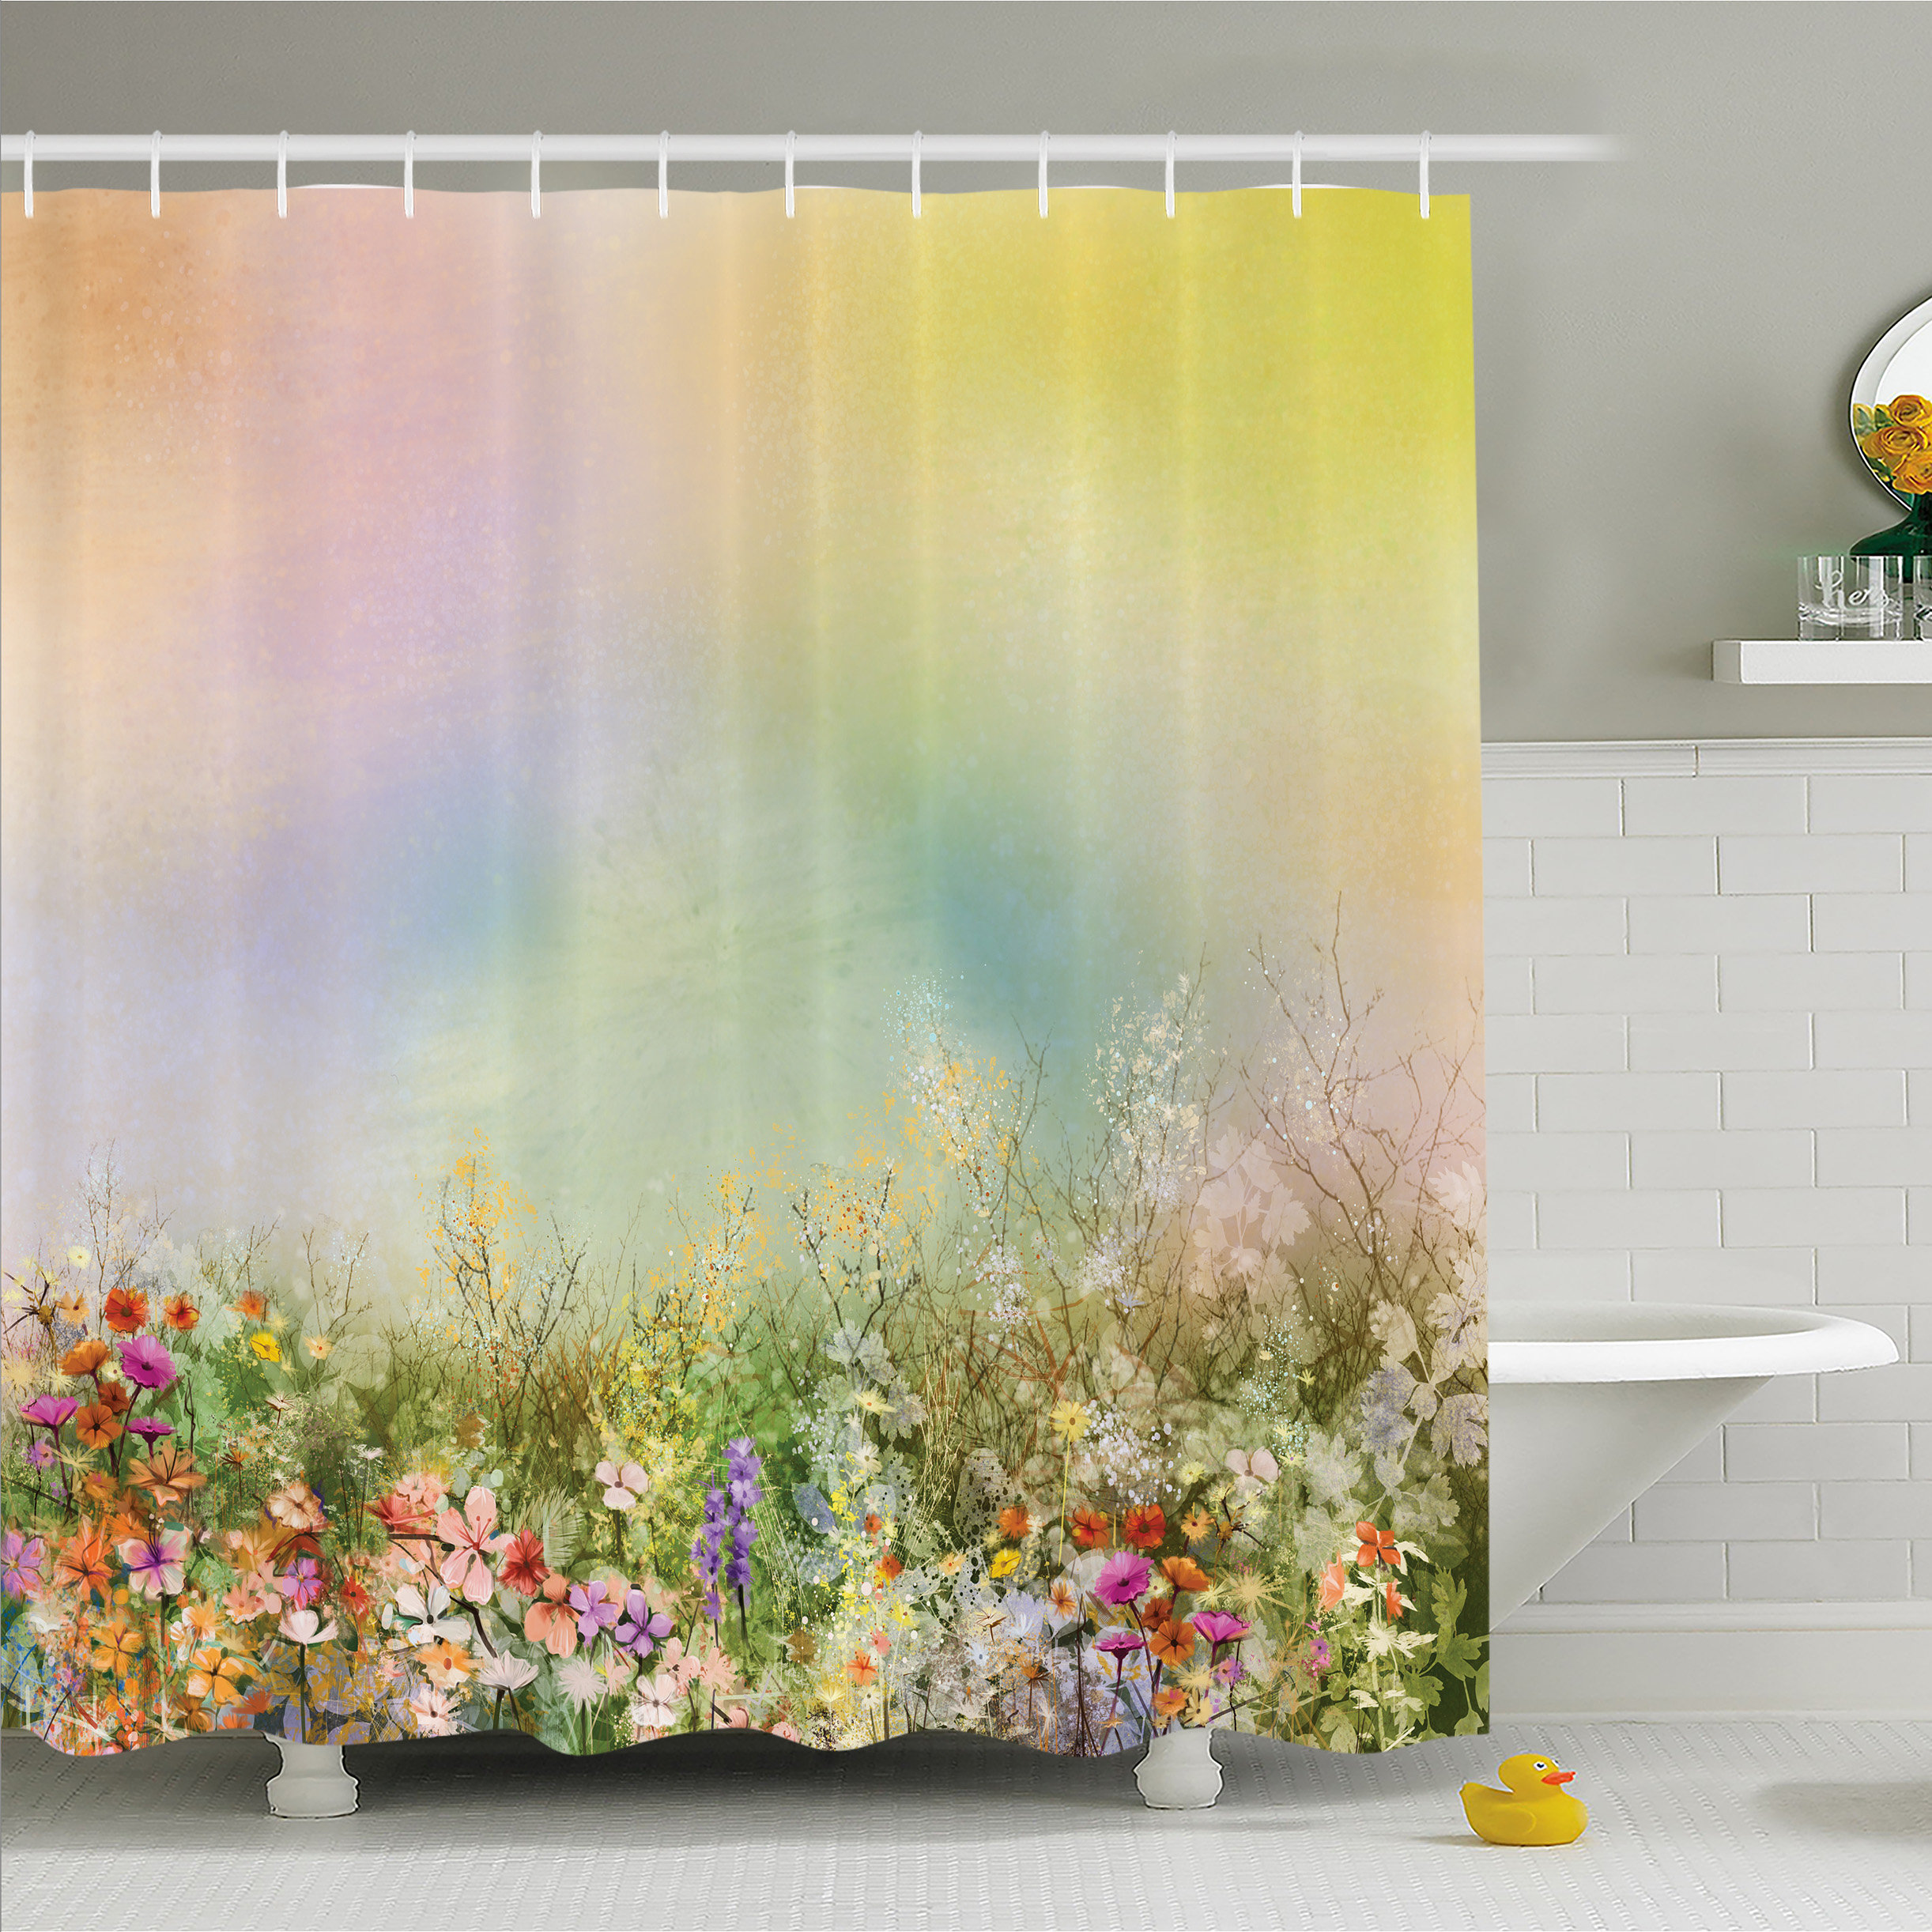 Colorful Daisy Flower Ink Painting Fabric Shower Curtain Hook Bath Accessory Set 